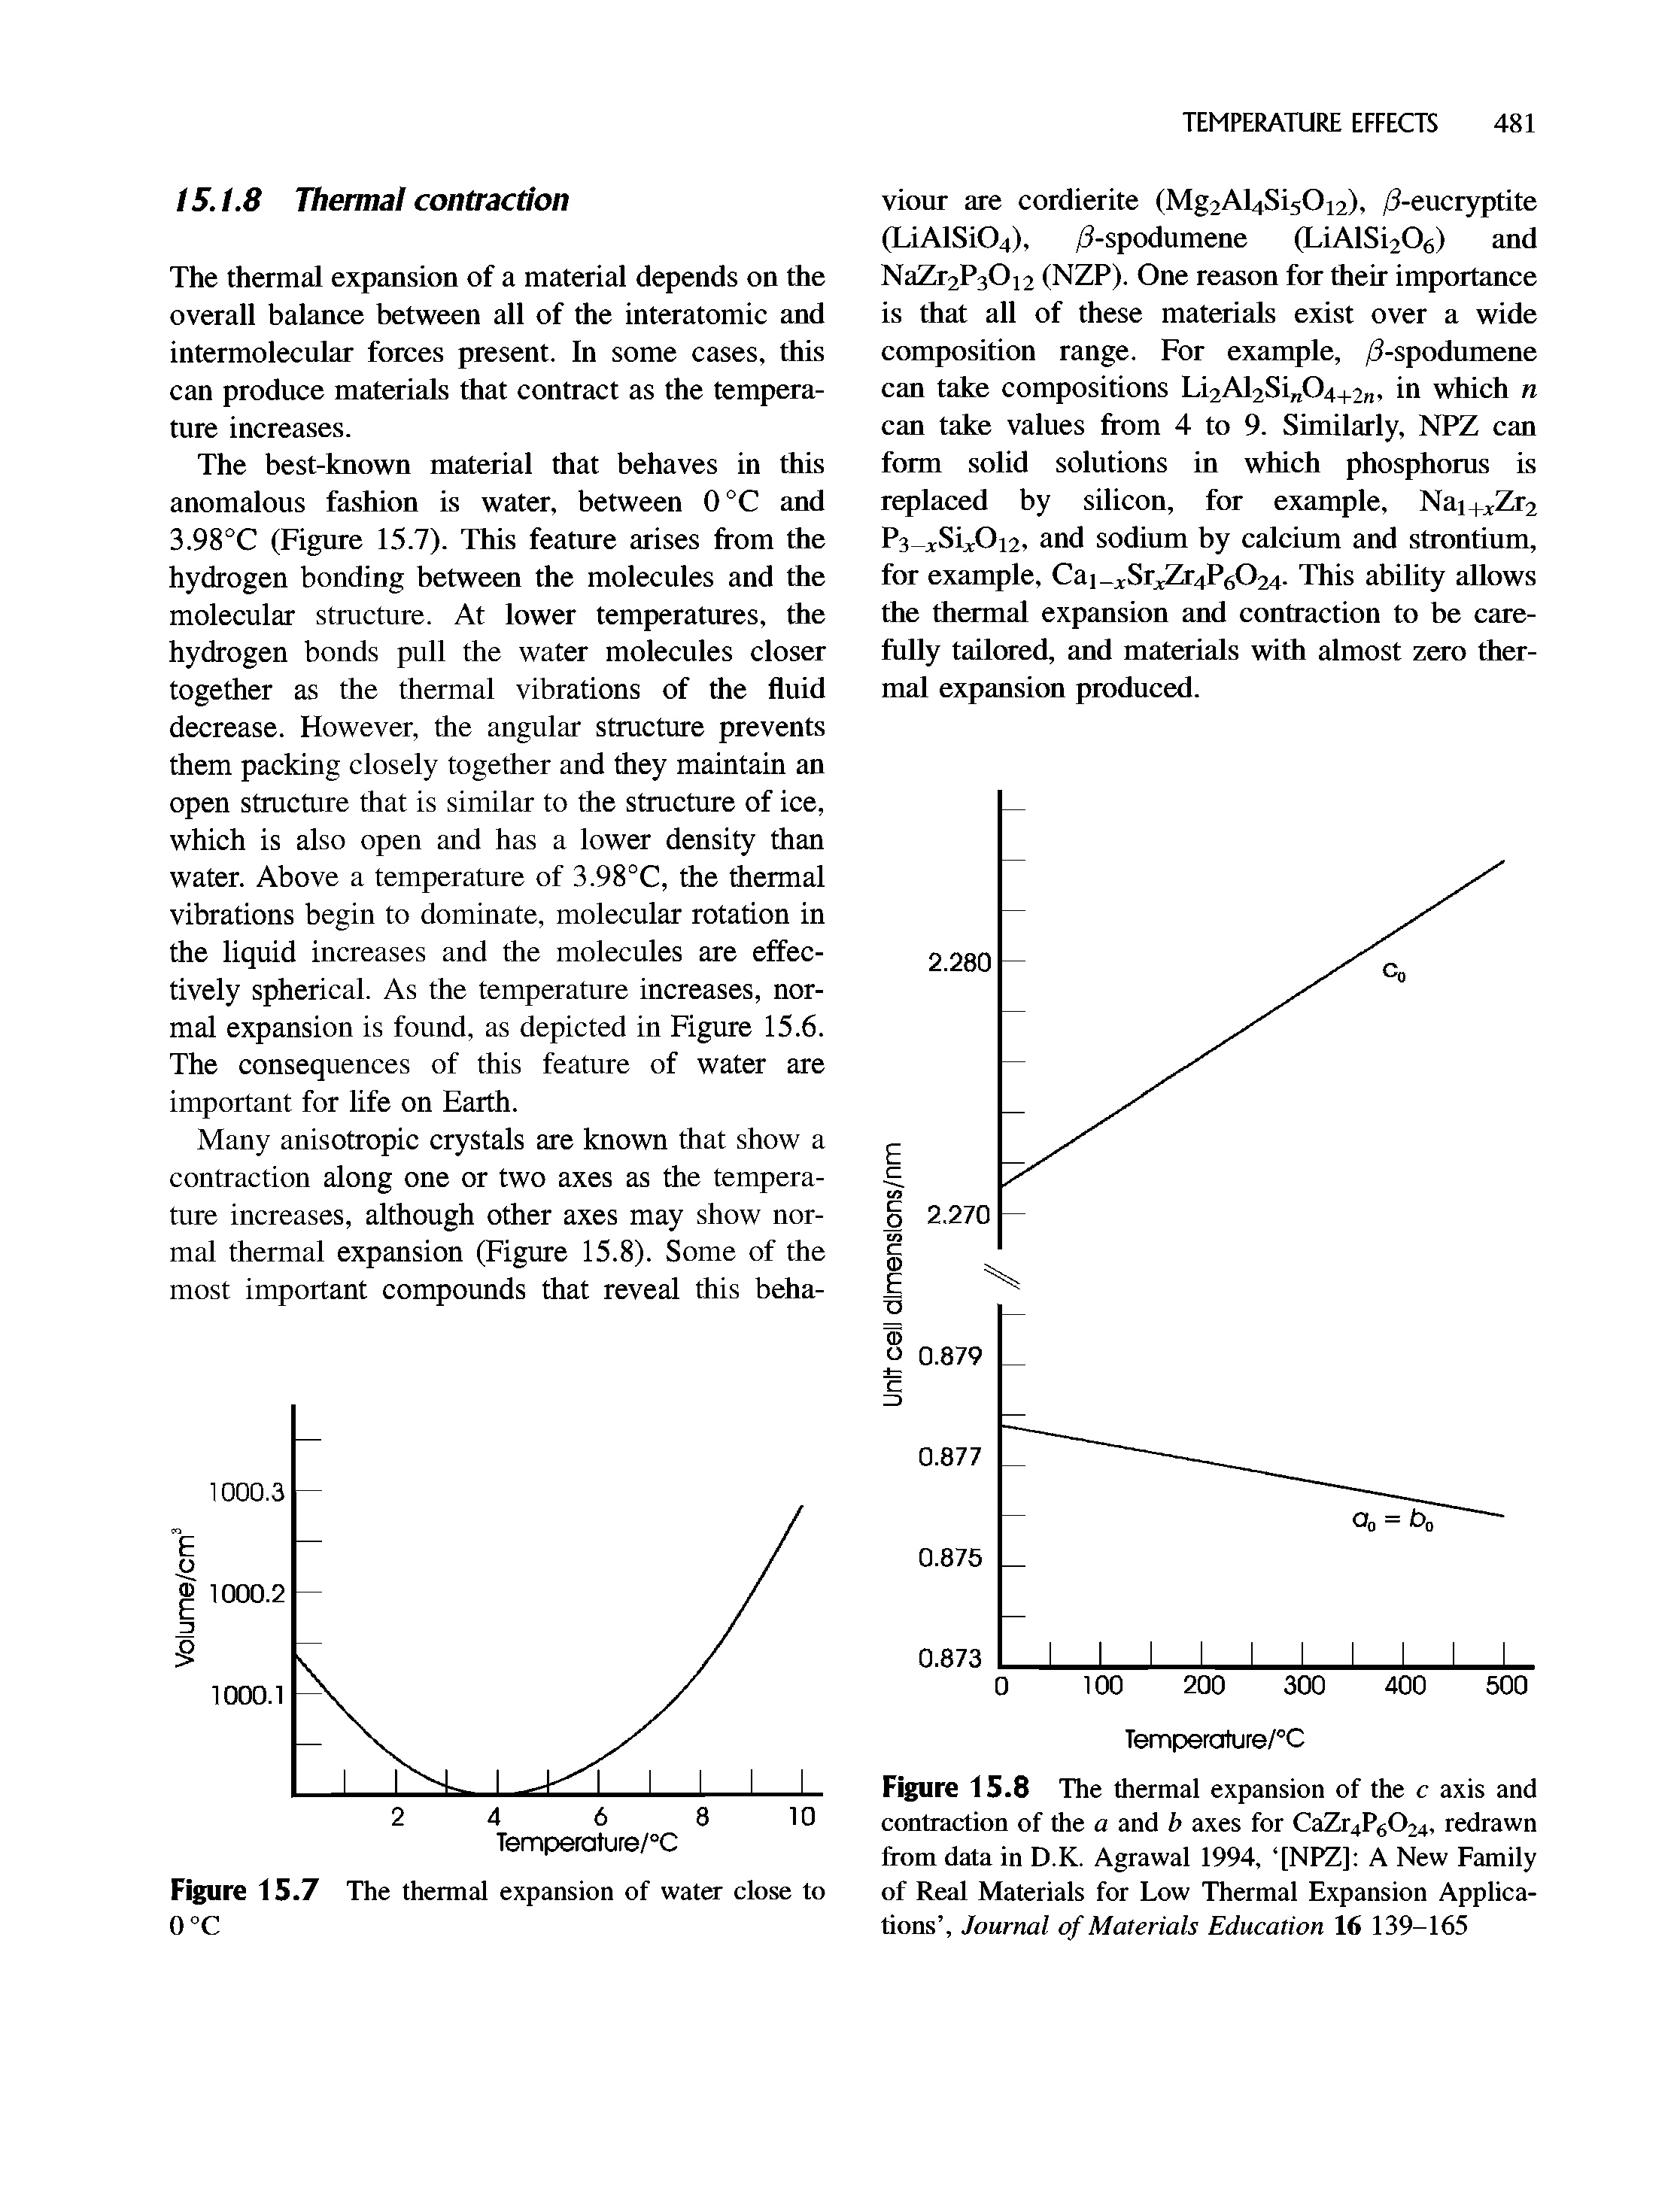 Figure 15.8 The thermal expansion of the c axis and contraction of the a and b axes for CaZr4P6024, redrawn from data in D.K. Agrawal 1994, [NF ] A New Family of Real Materials for Low Thermal Expansion Applications , Journal of Materials Education 16 139-165...